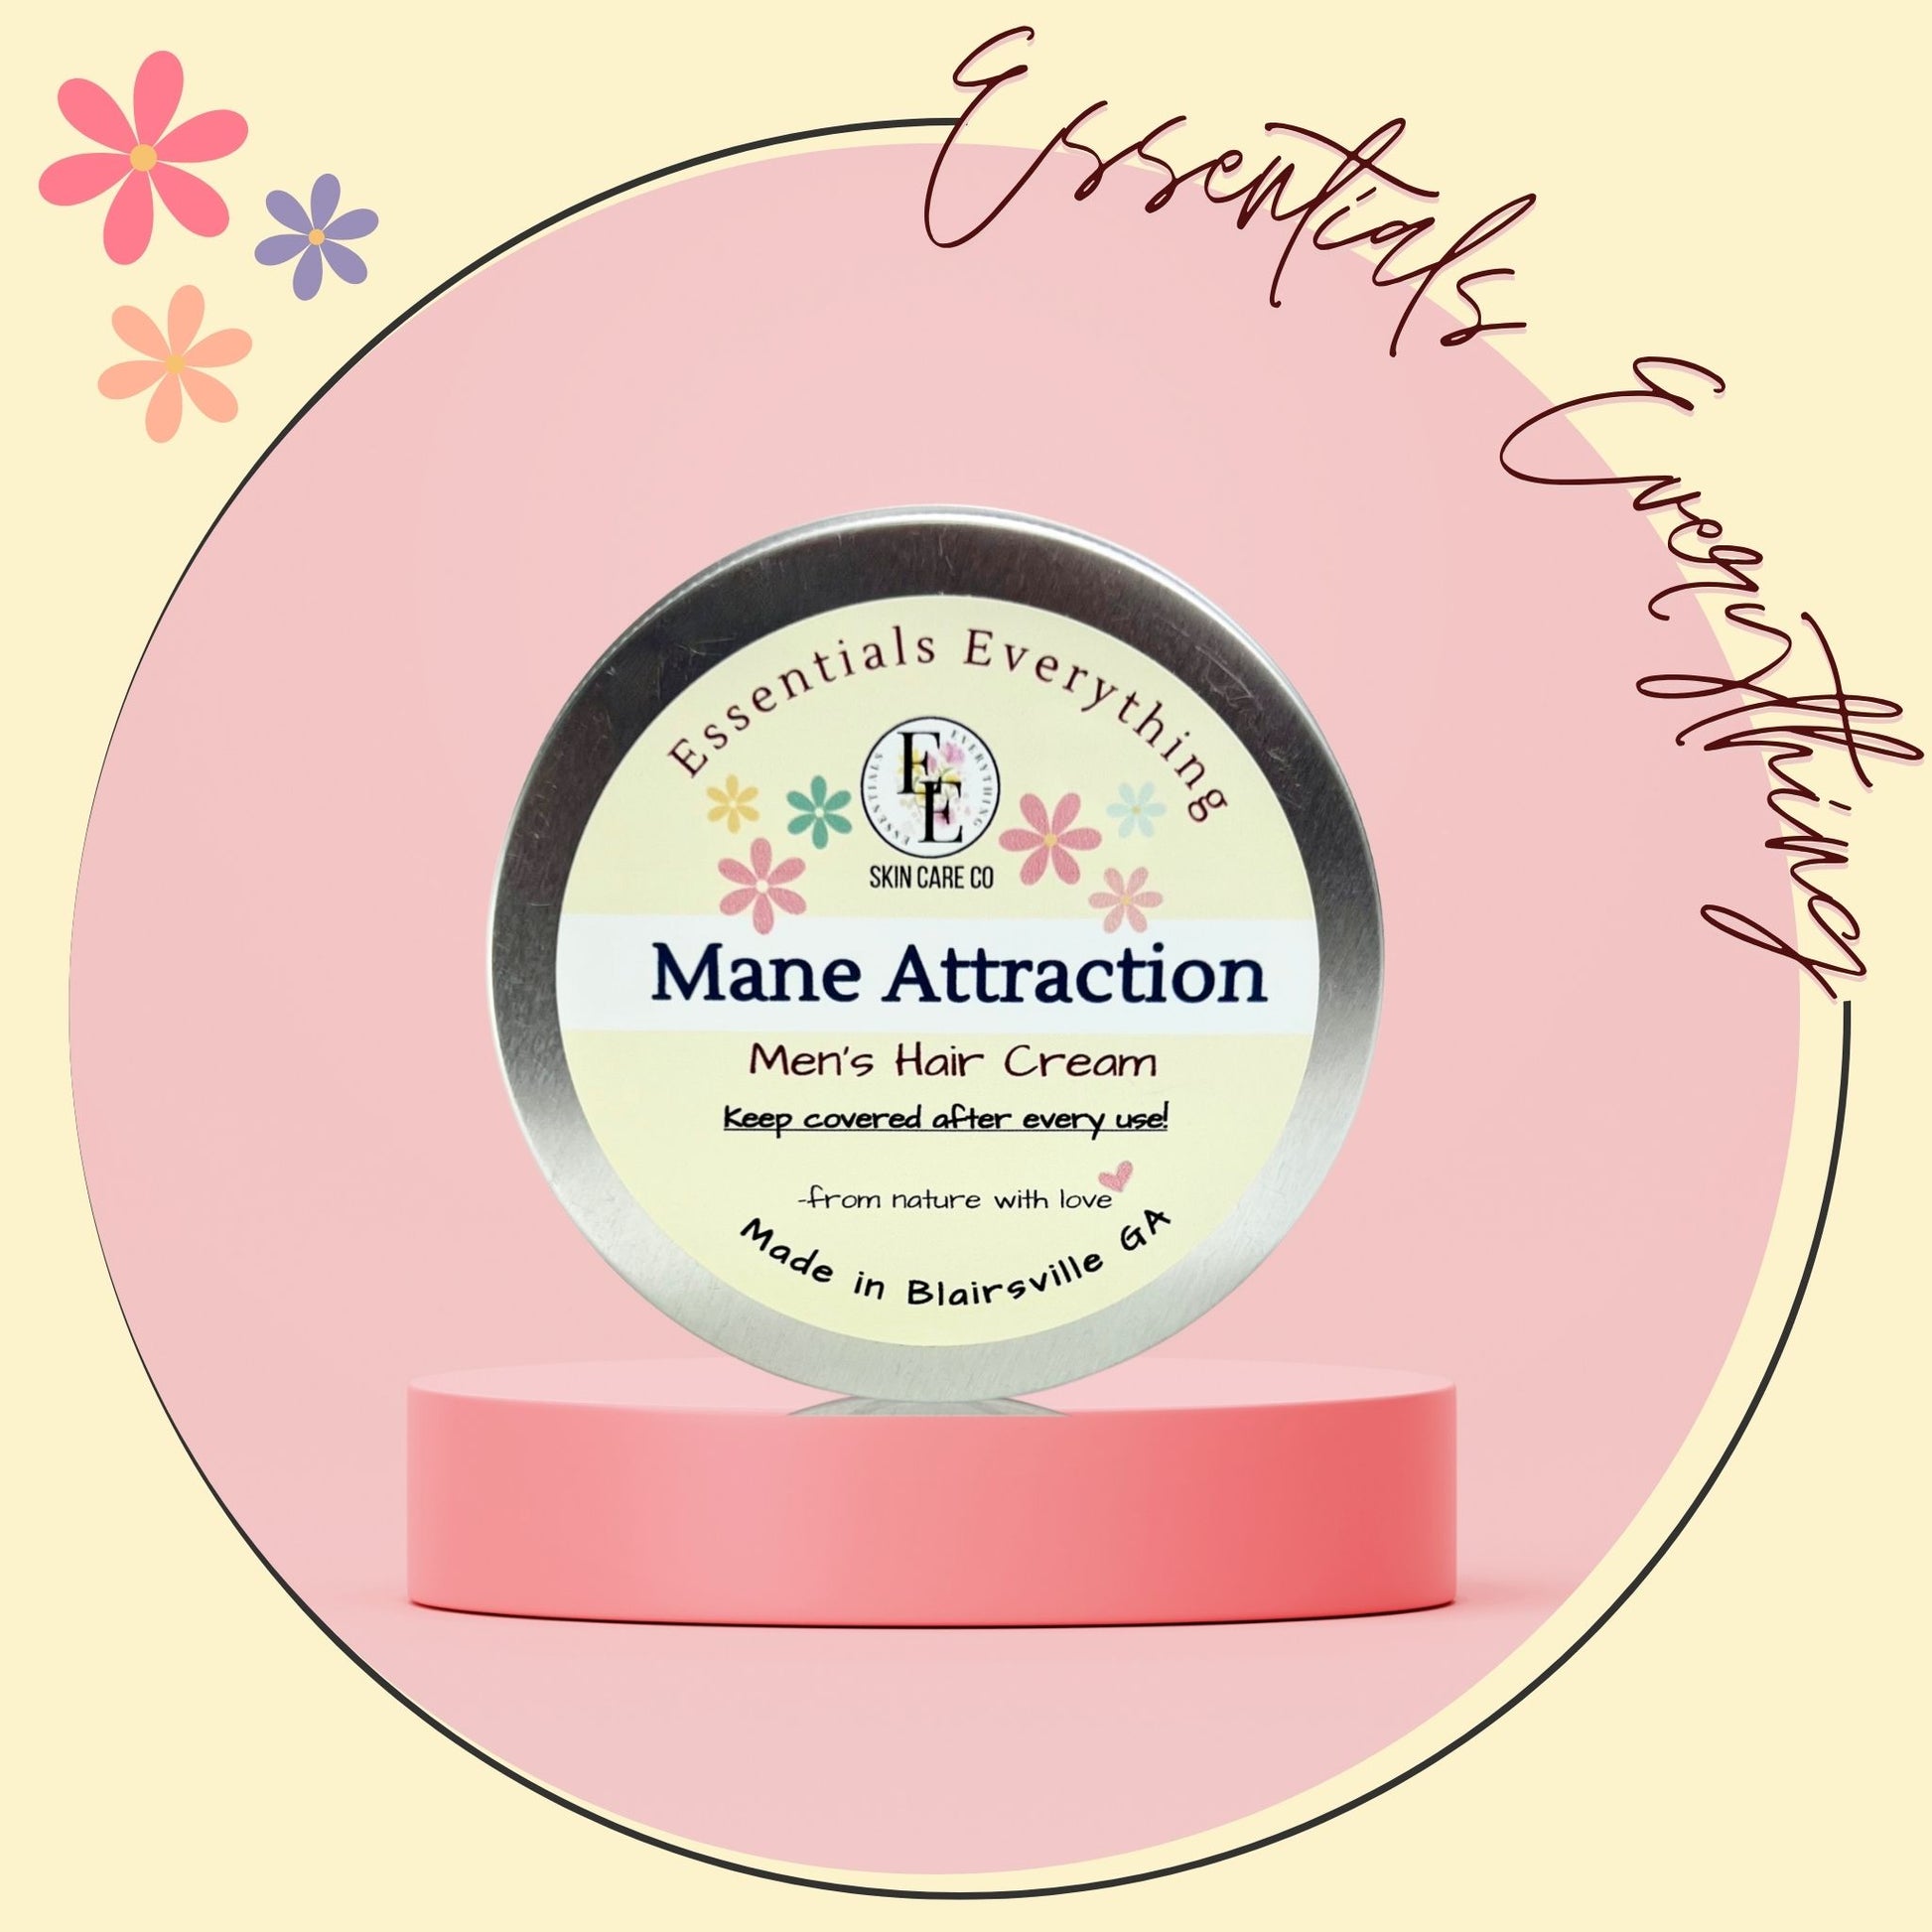 Mane Attraction - All Natural Hair Styling Conditioner for Her by Essentials Everything Skin Care Co 4 oz